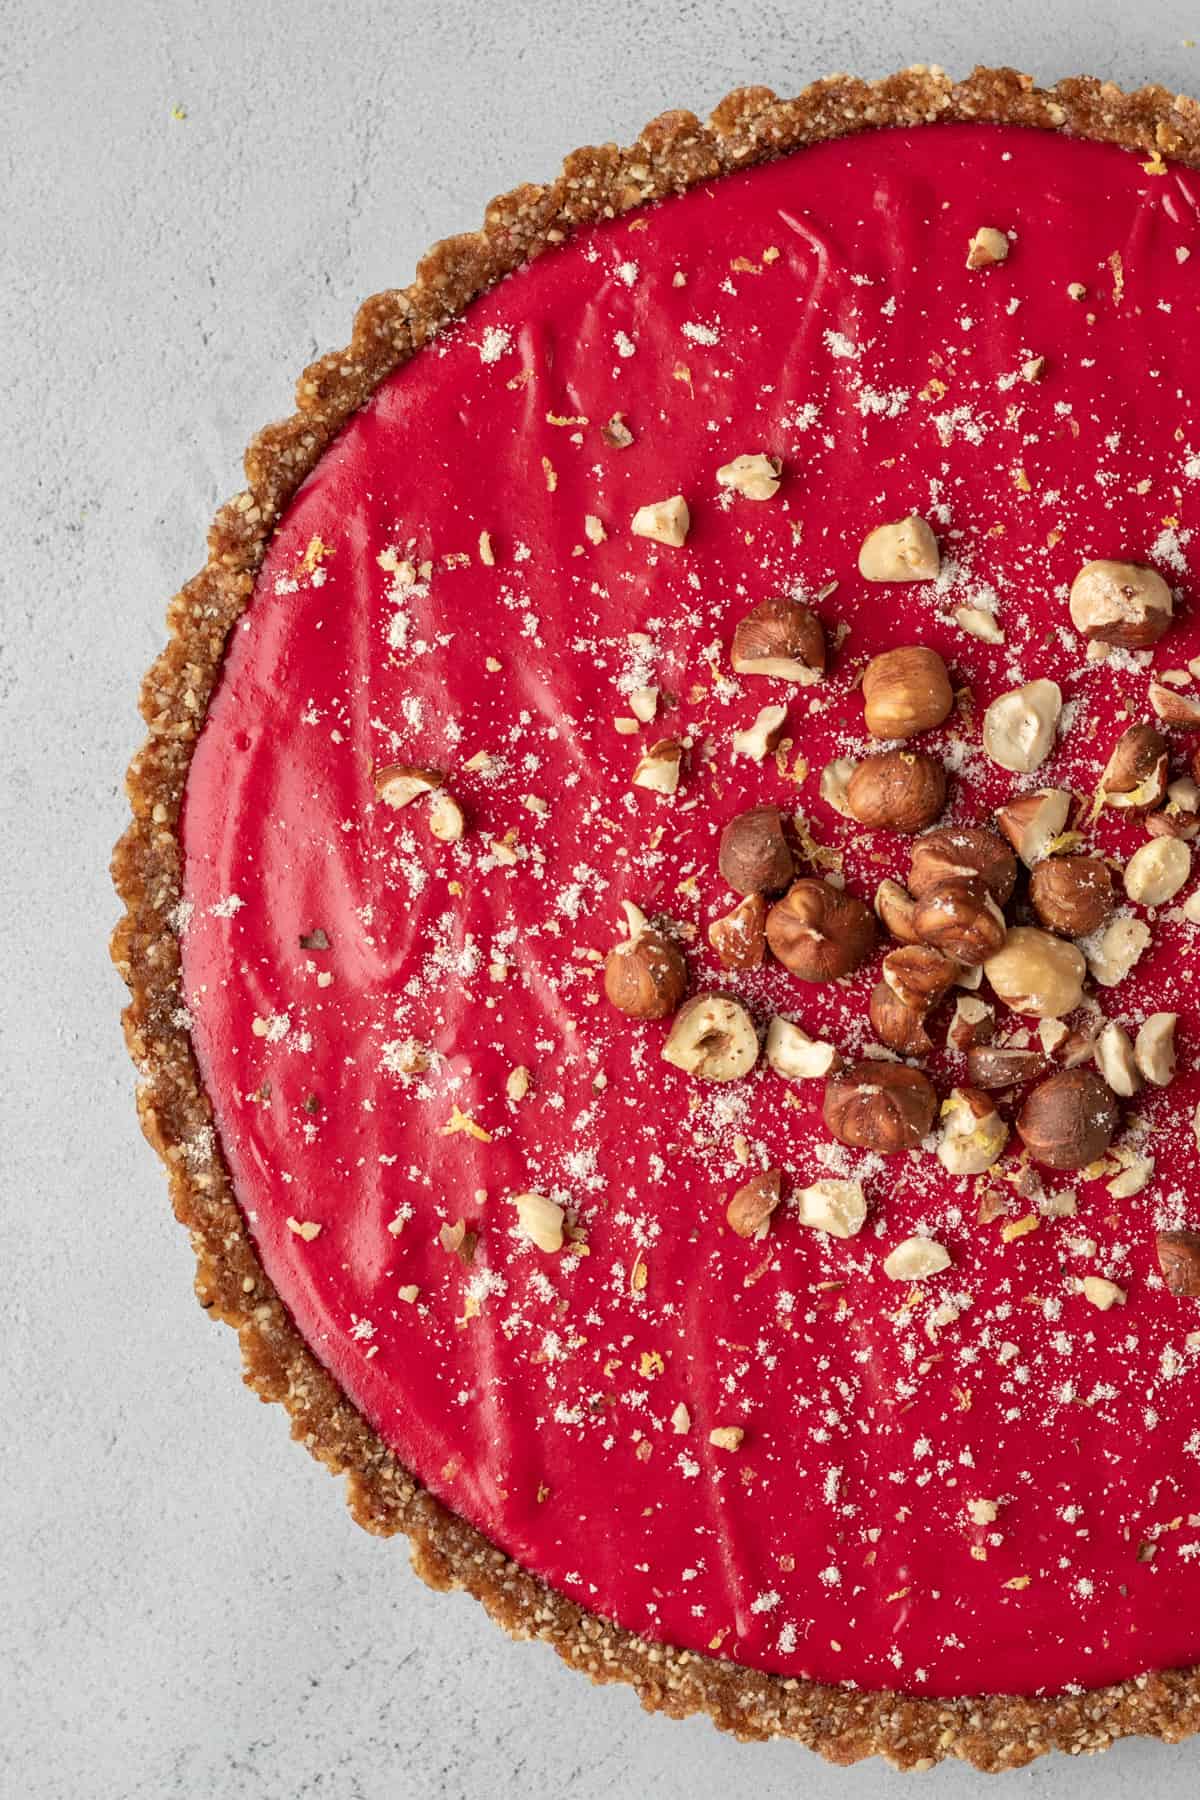 a bright red tart topped with chopped hazelnuts.